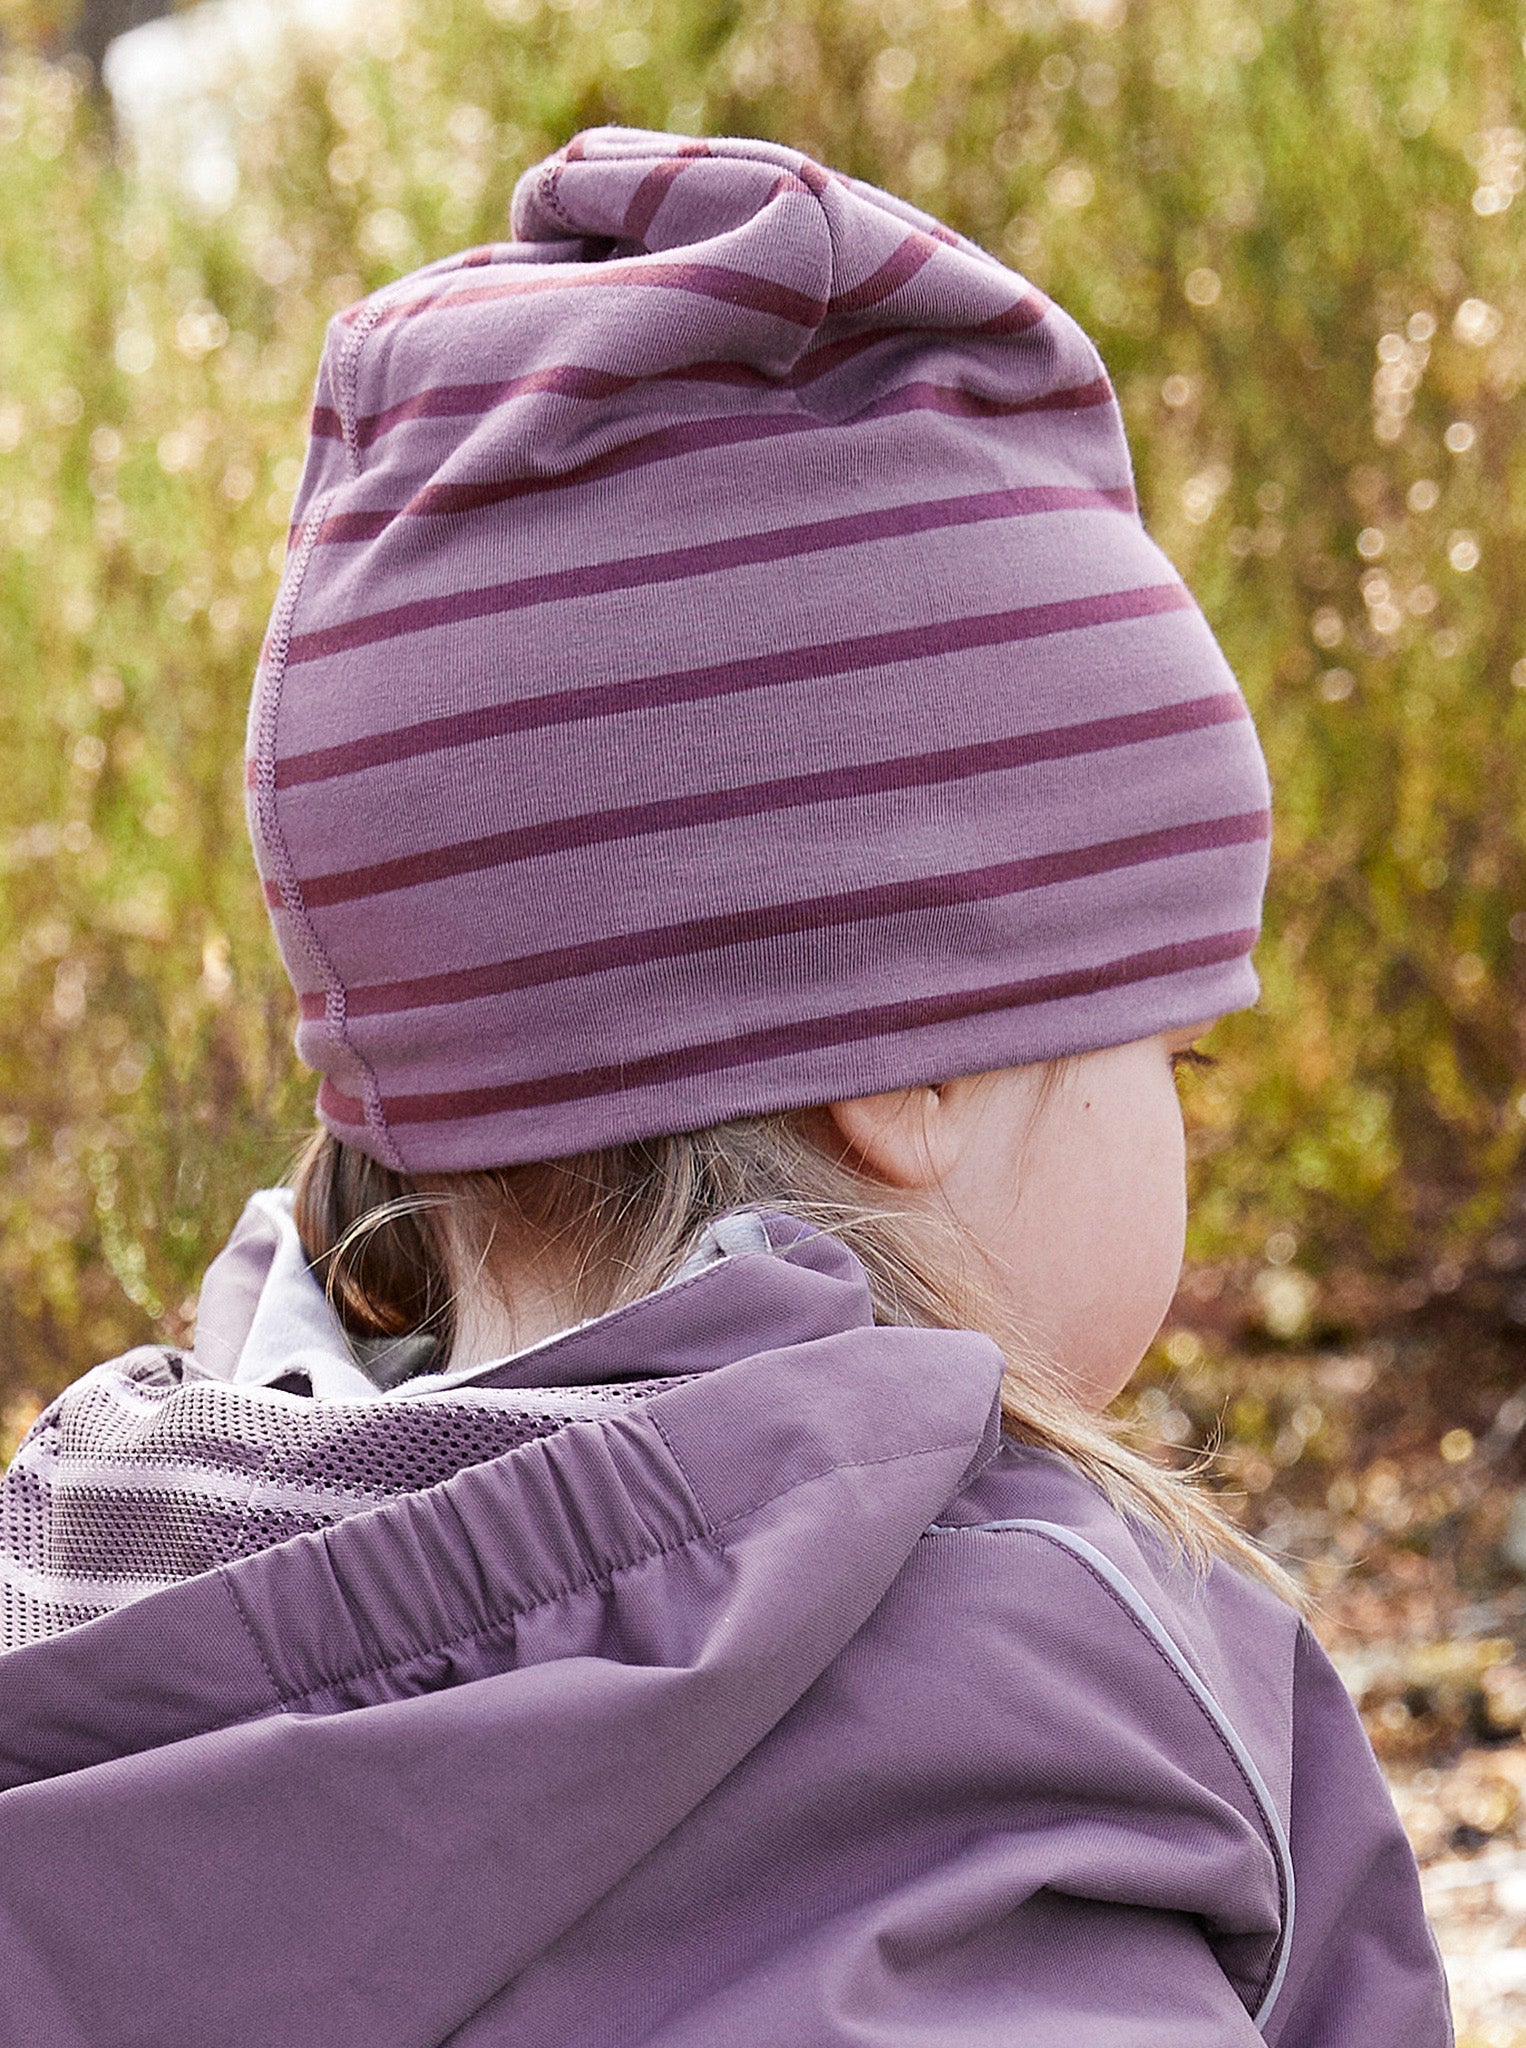 Purple Fleece Lined Kids Beanie Hat from the Polarn O. Pyret kidswear collection. The best ethical kids outerwear.